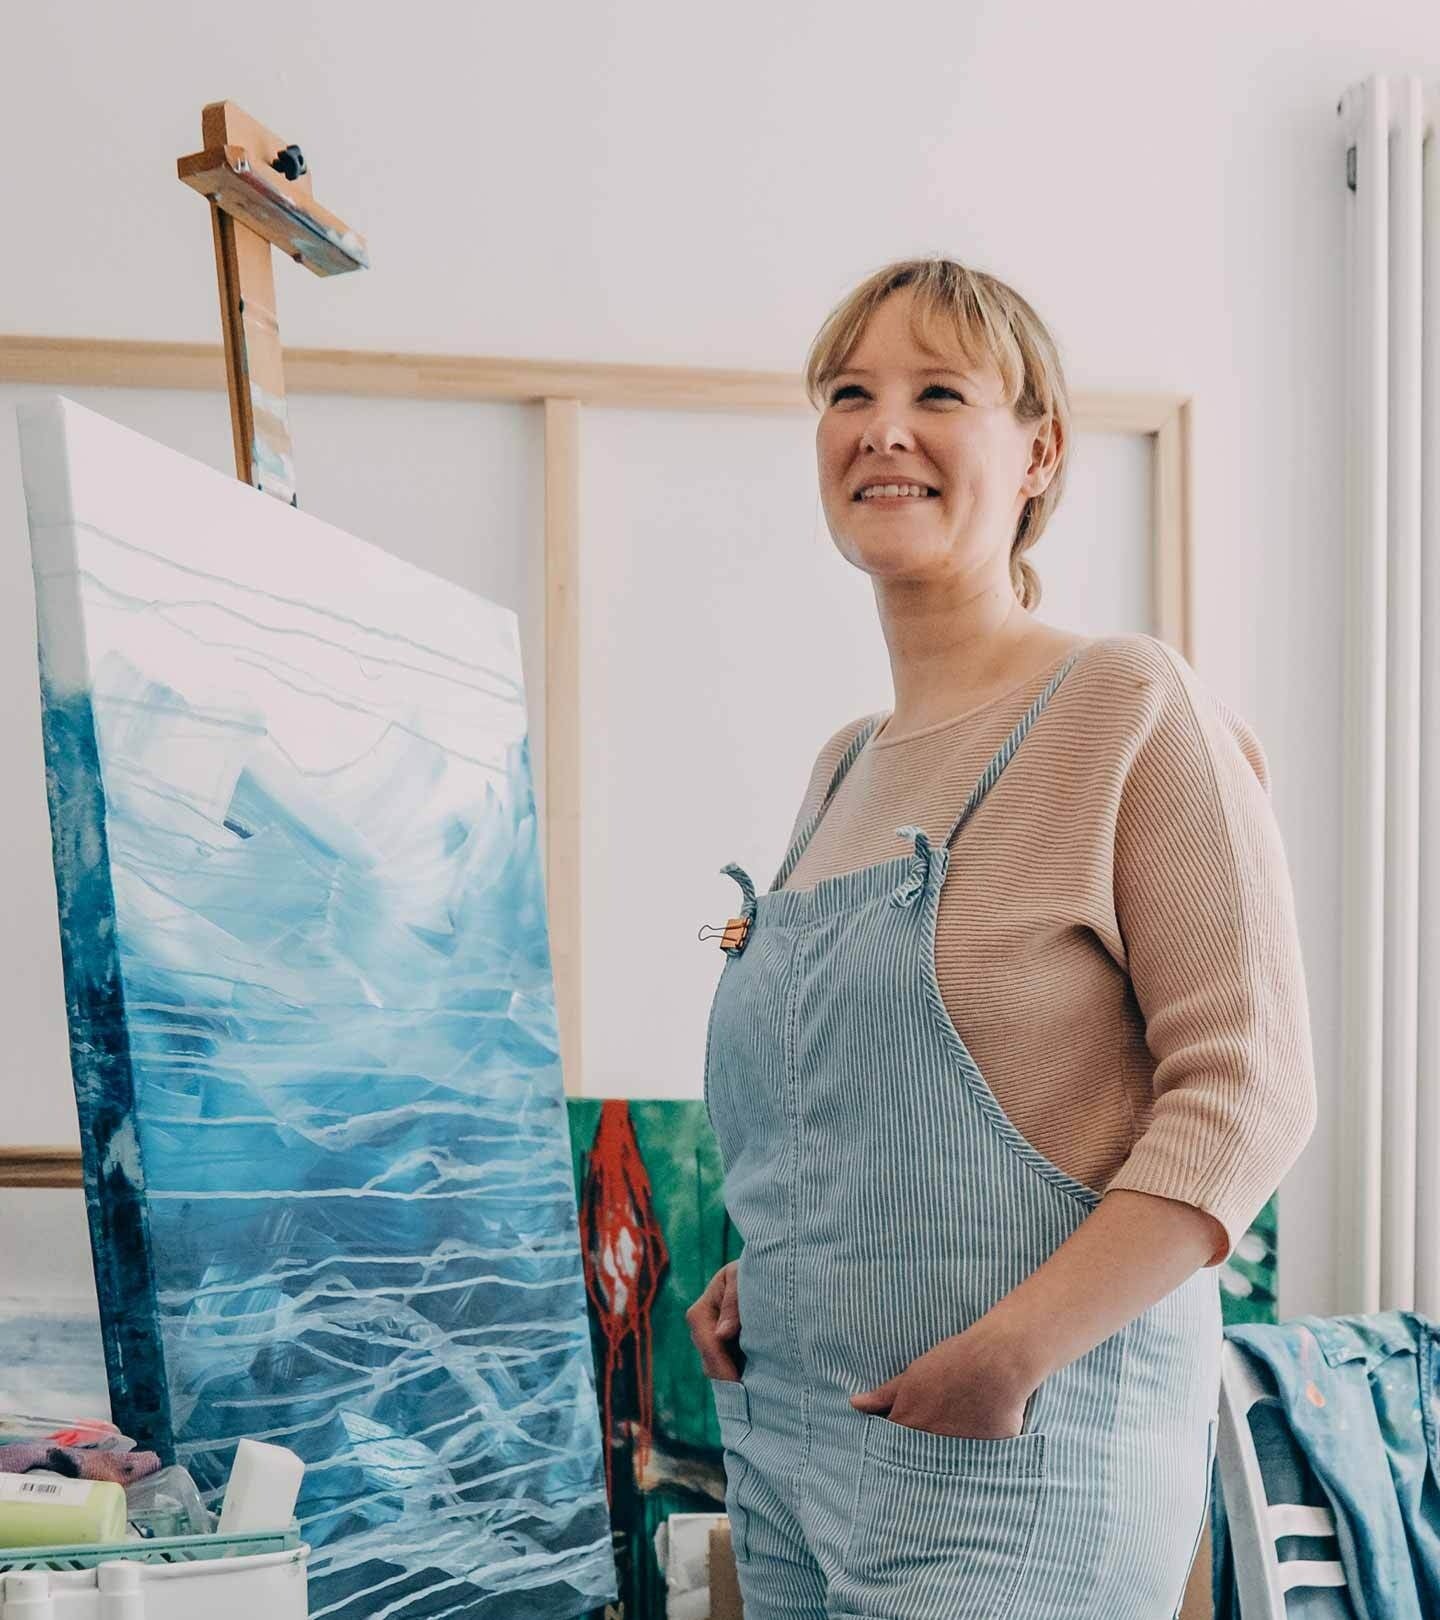 Jimdo customer and artist in her painting studio